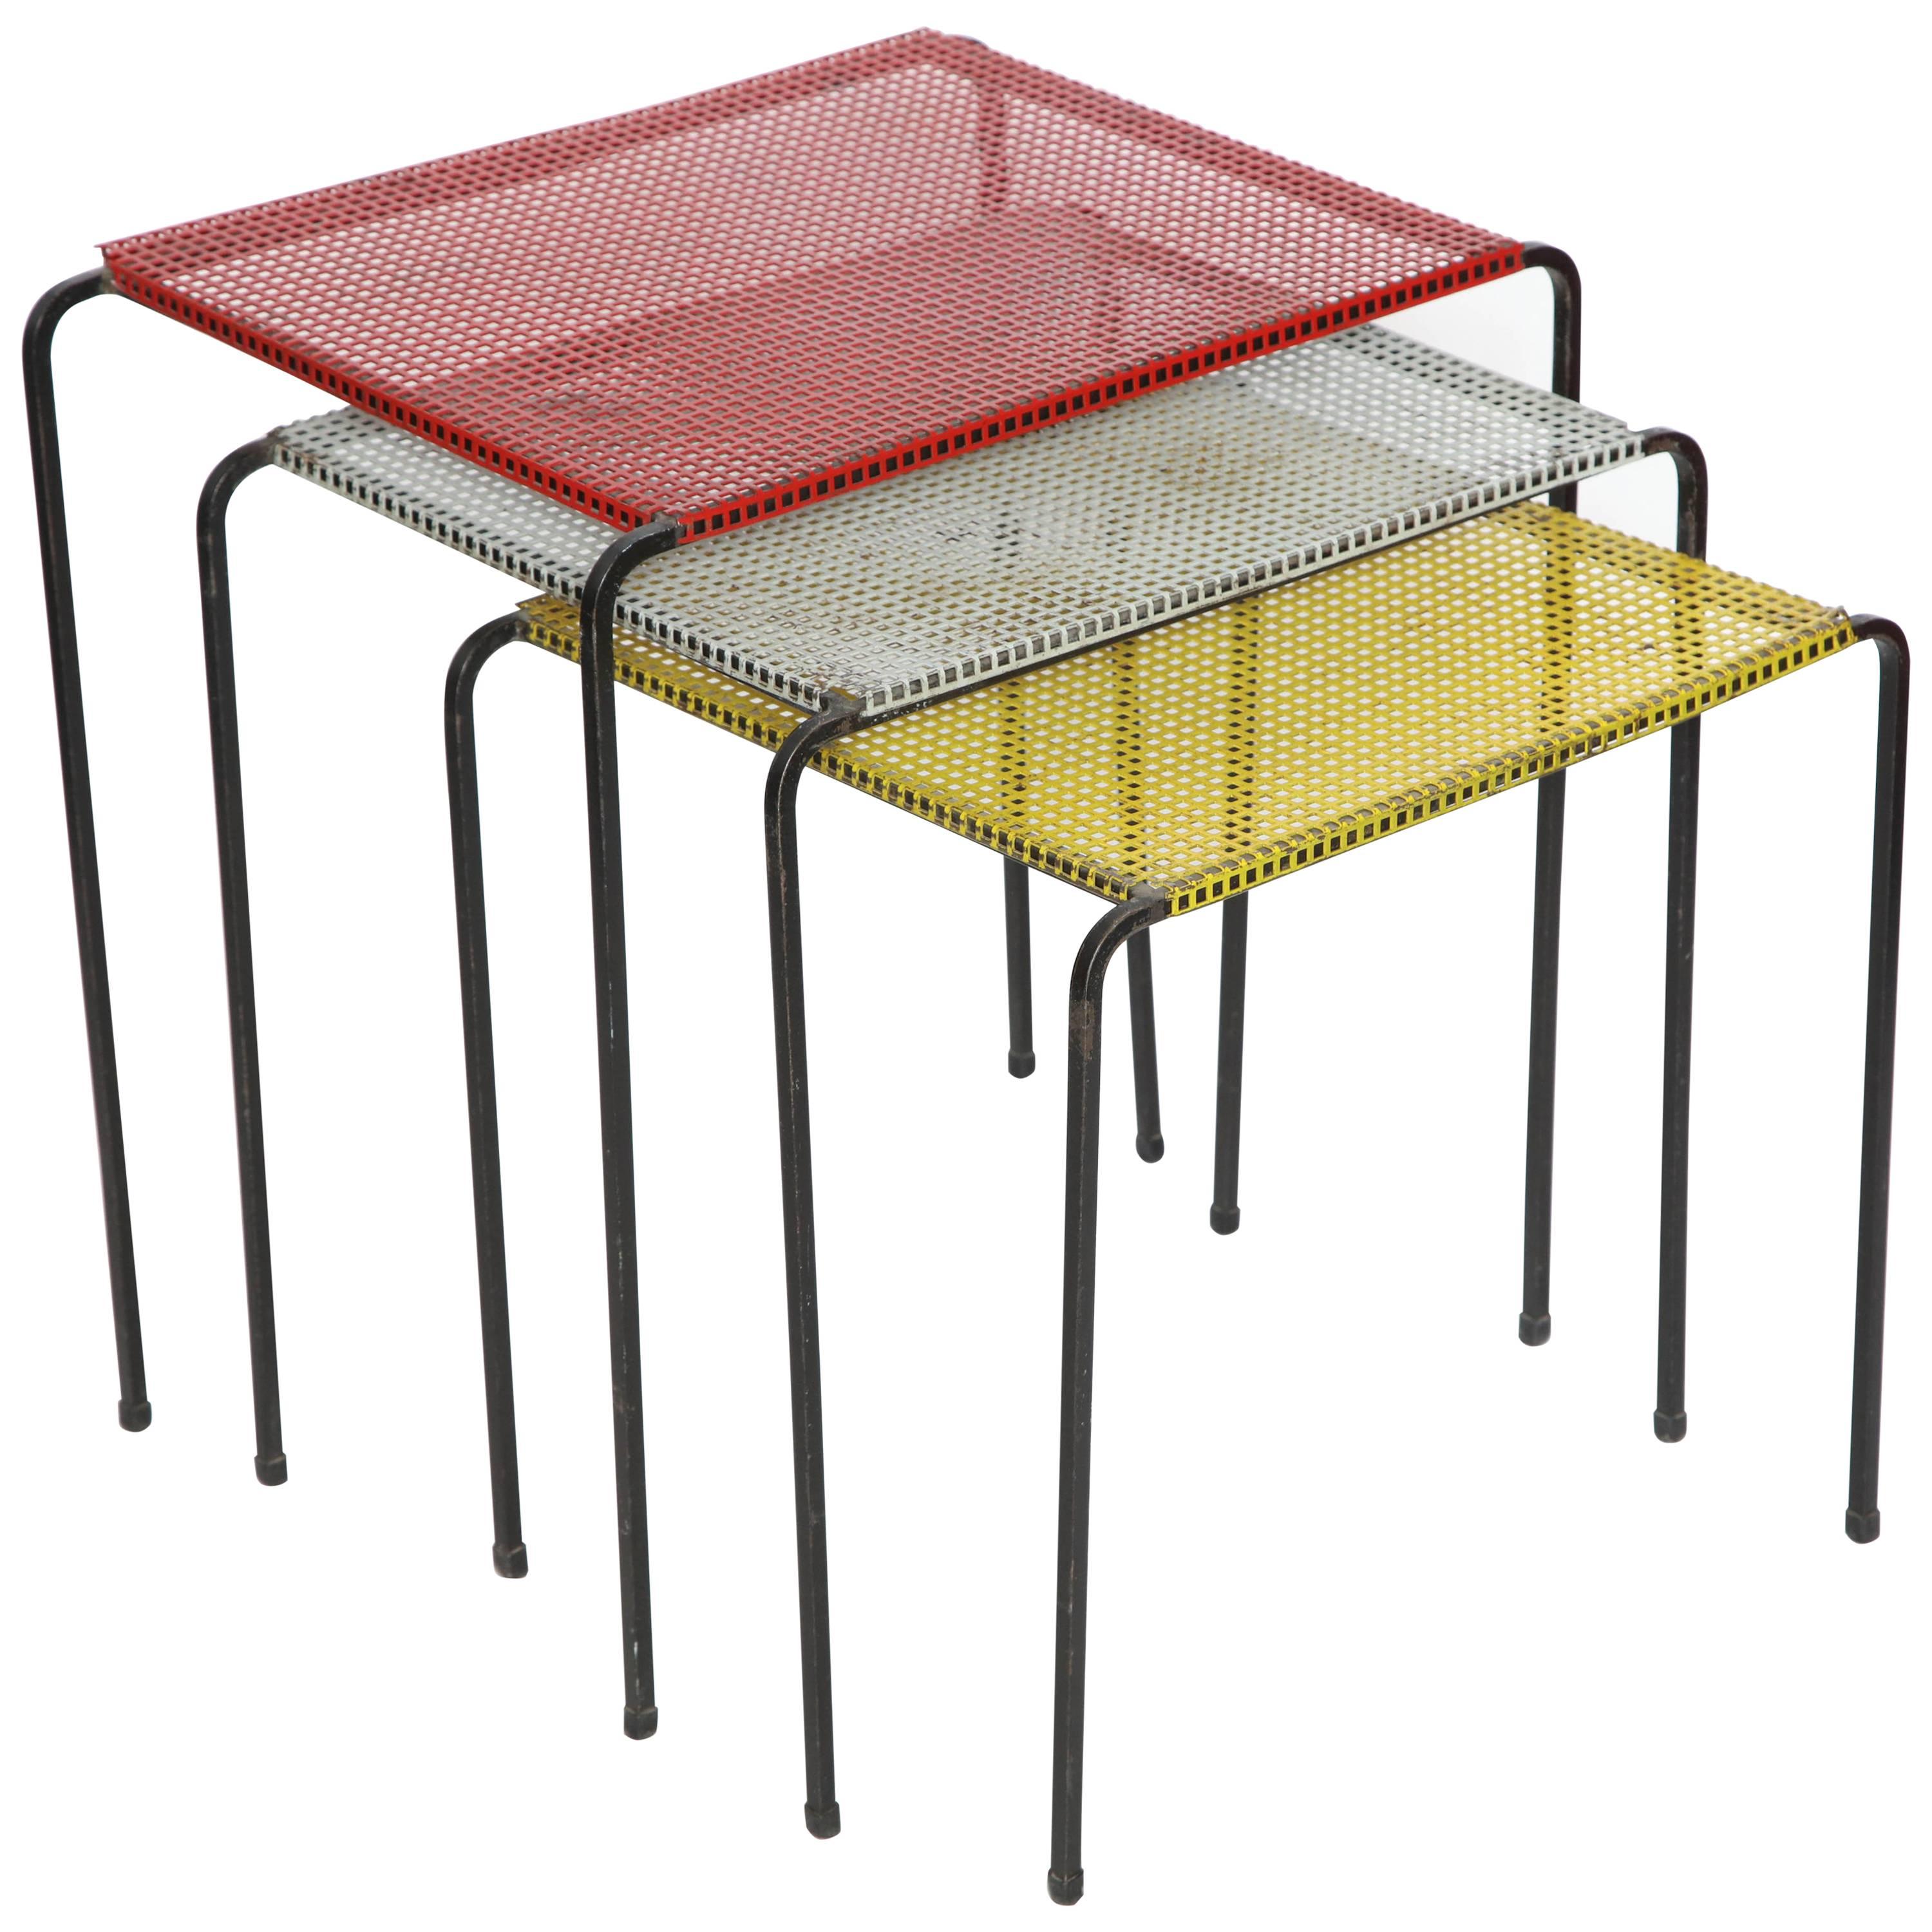 Attributed to Mategot Mid-Century Modern Metal Nesting Tables, France, 1950s